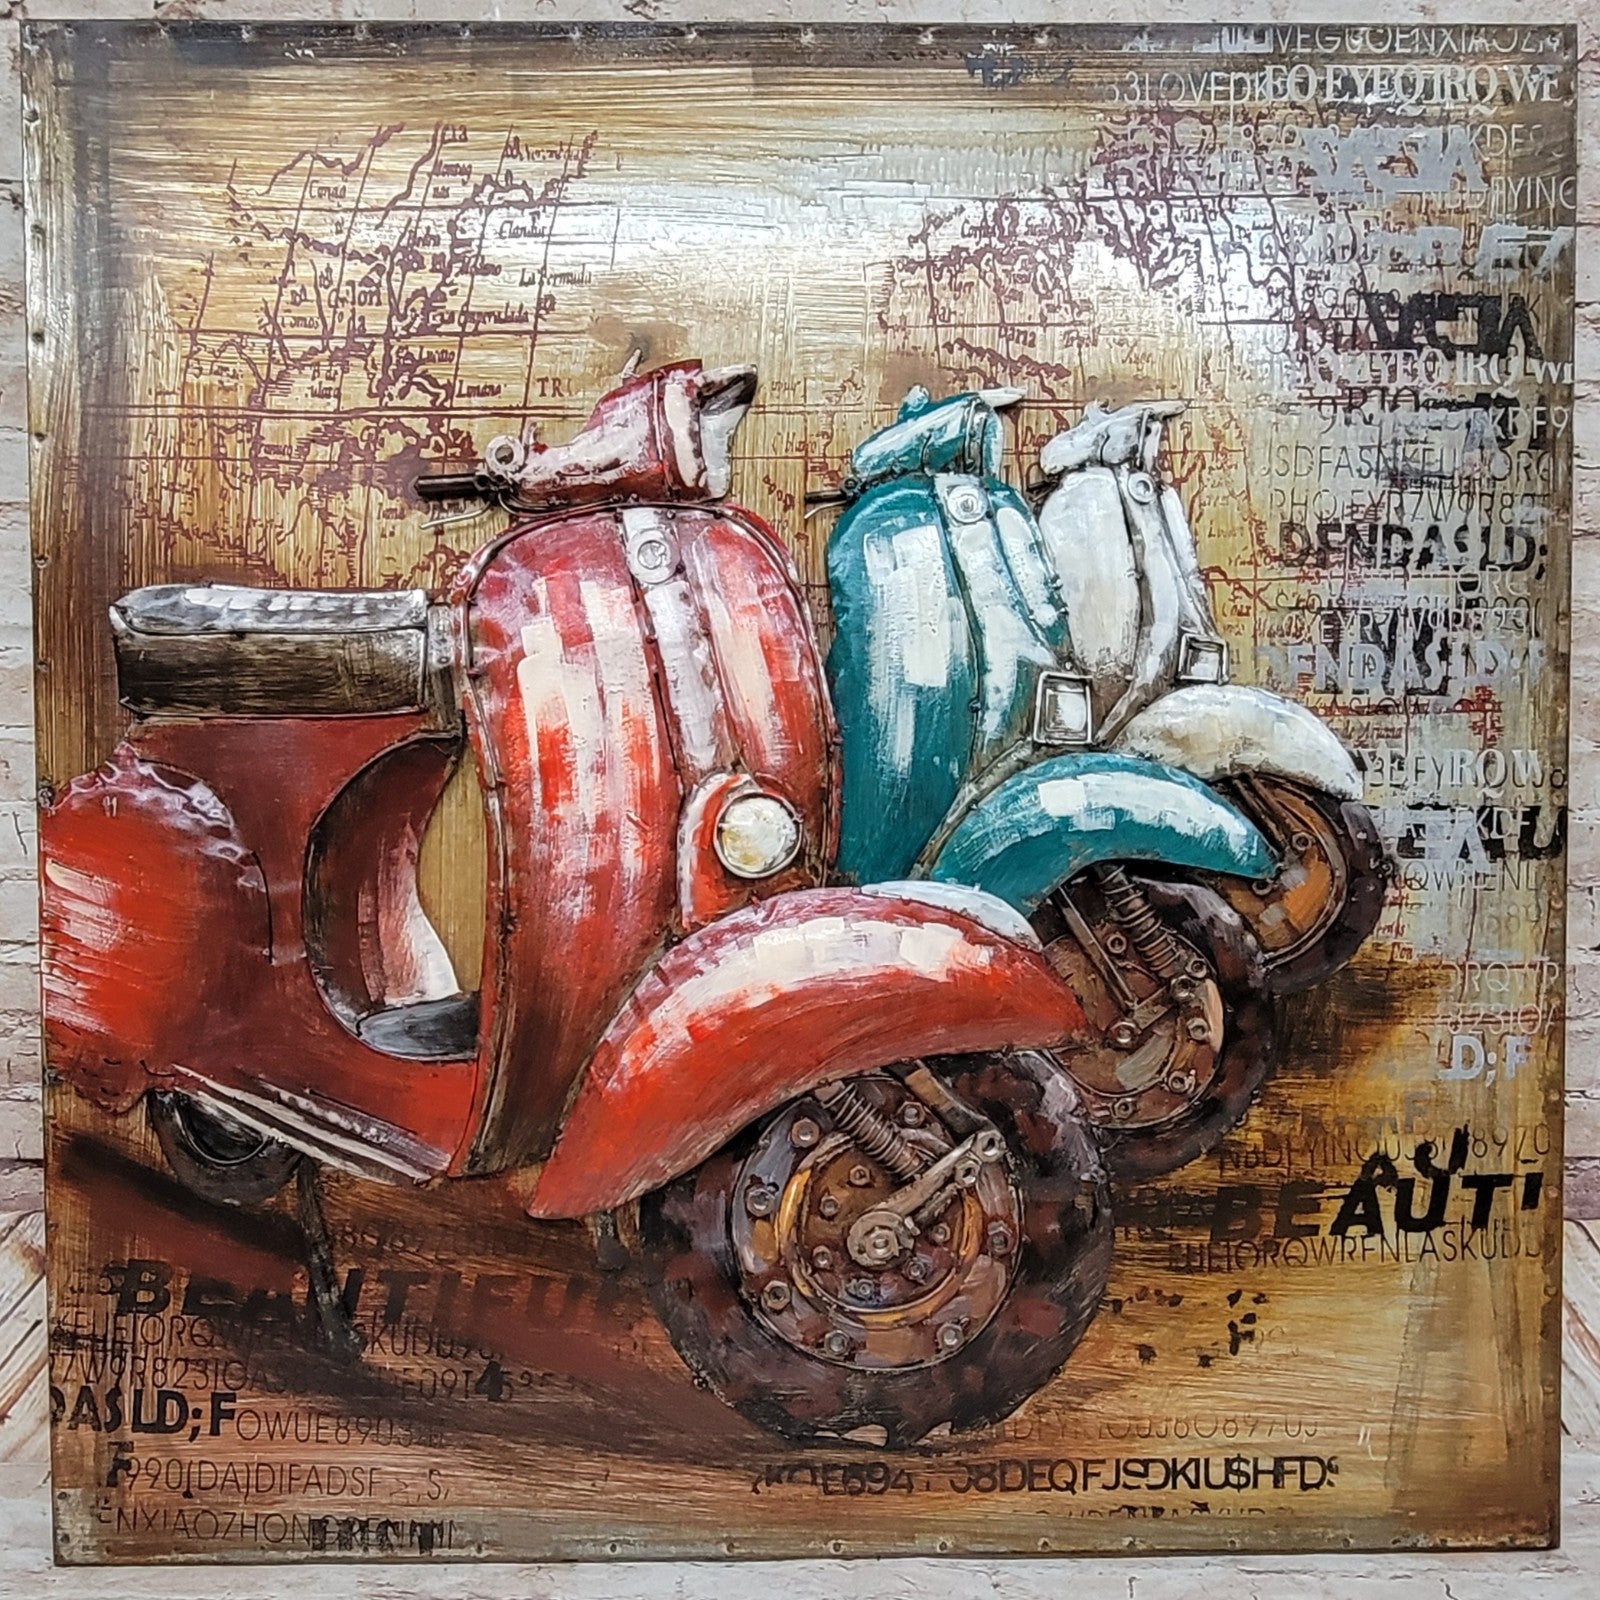 European 3D painting metal 32 x32 Inches Vespa Scooter Motor Bike Decor